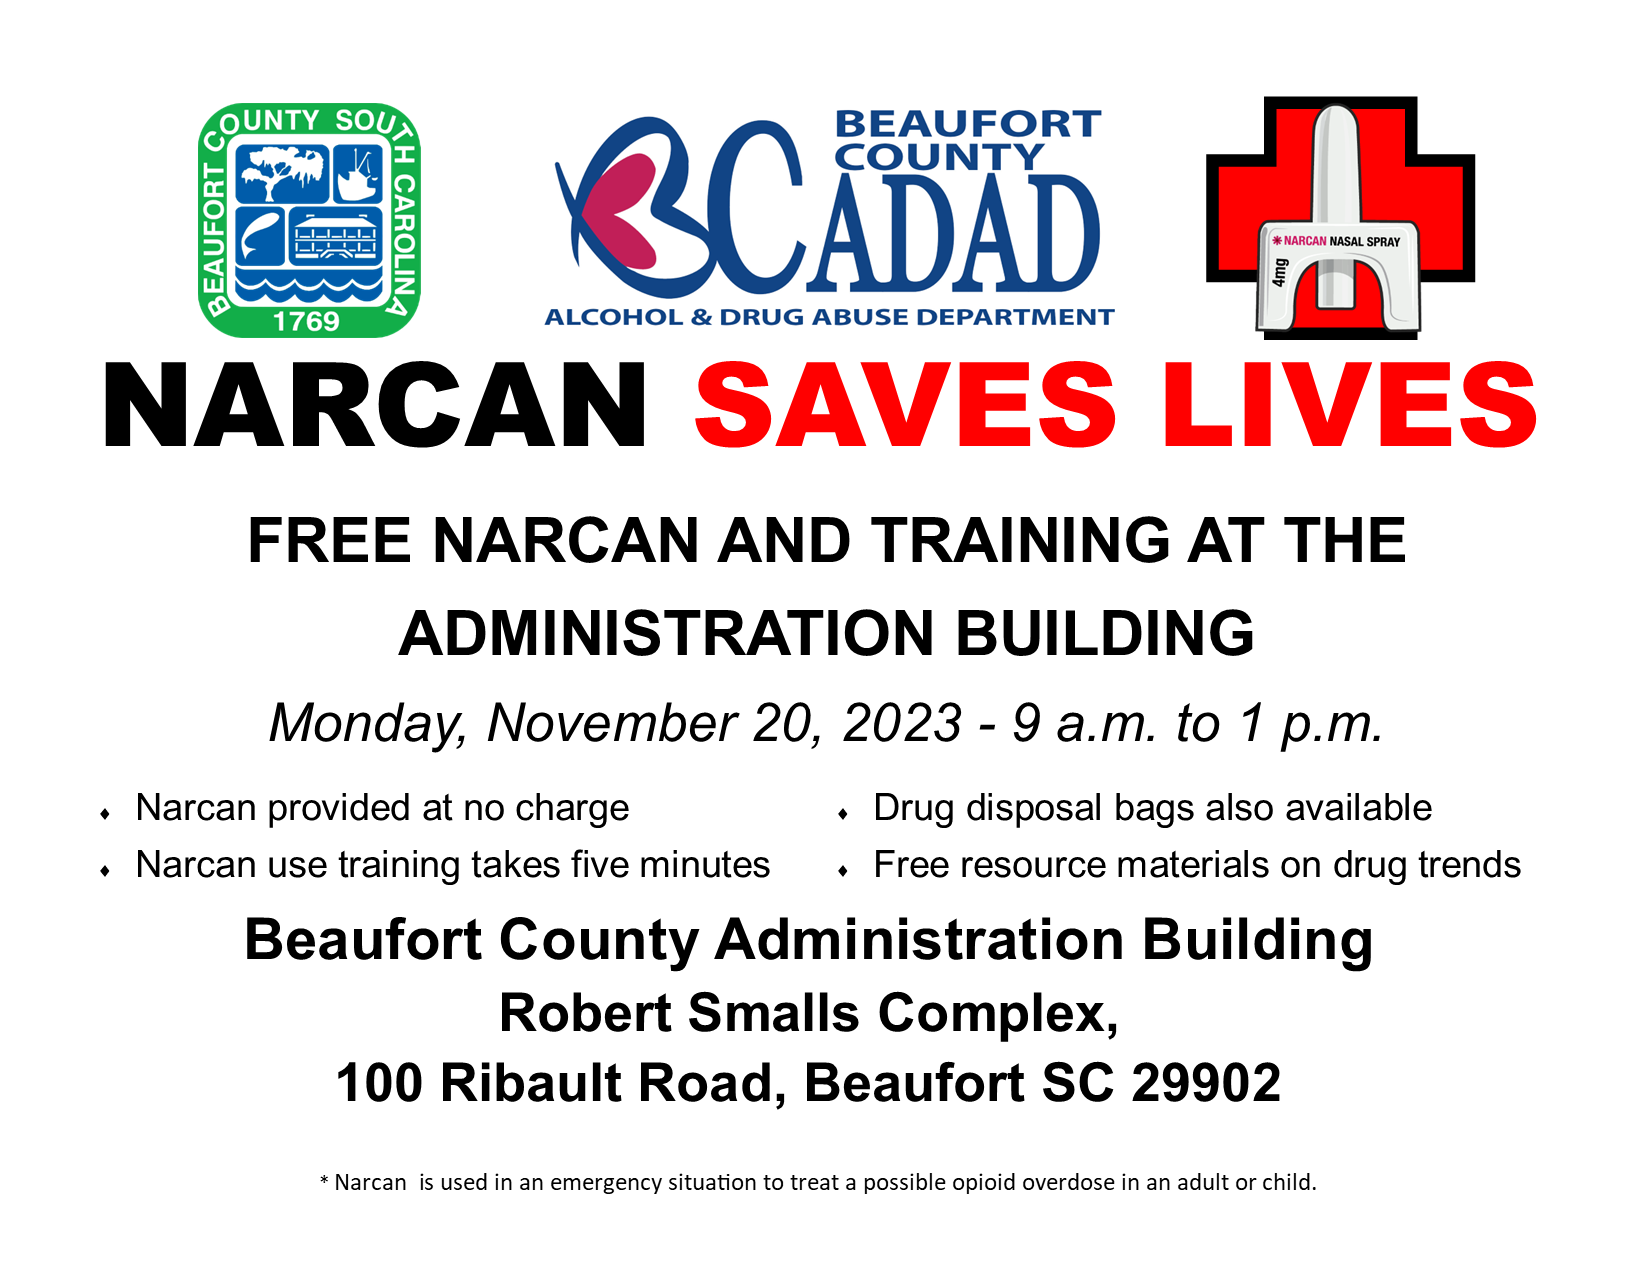 Free Narcan and Training to be Held at Beaufort County Administration Building, Monday, November 20